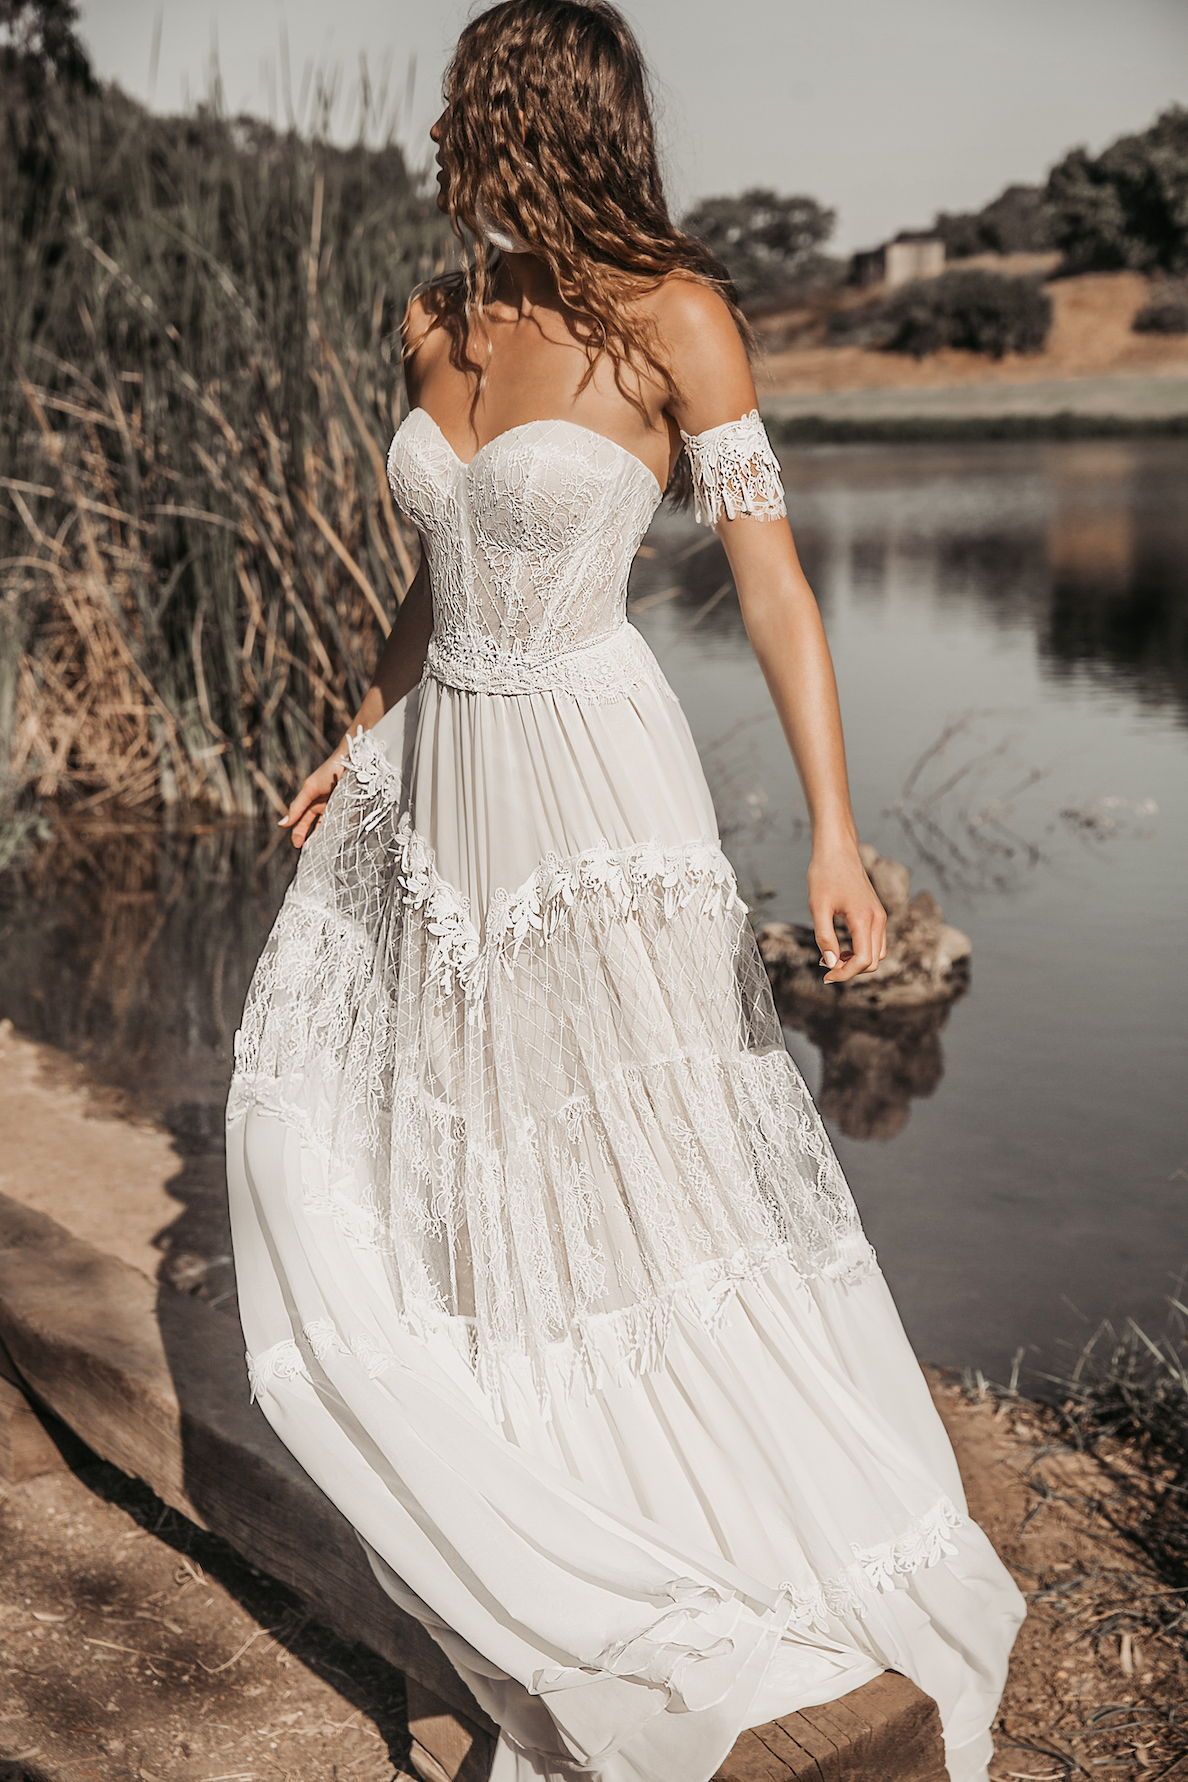 Say “I Do” in Style with
Elegant Wedding Gowns: Timeless Elegance for Every Bride